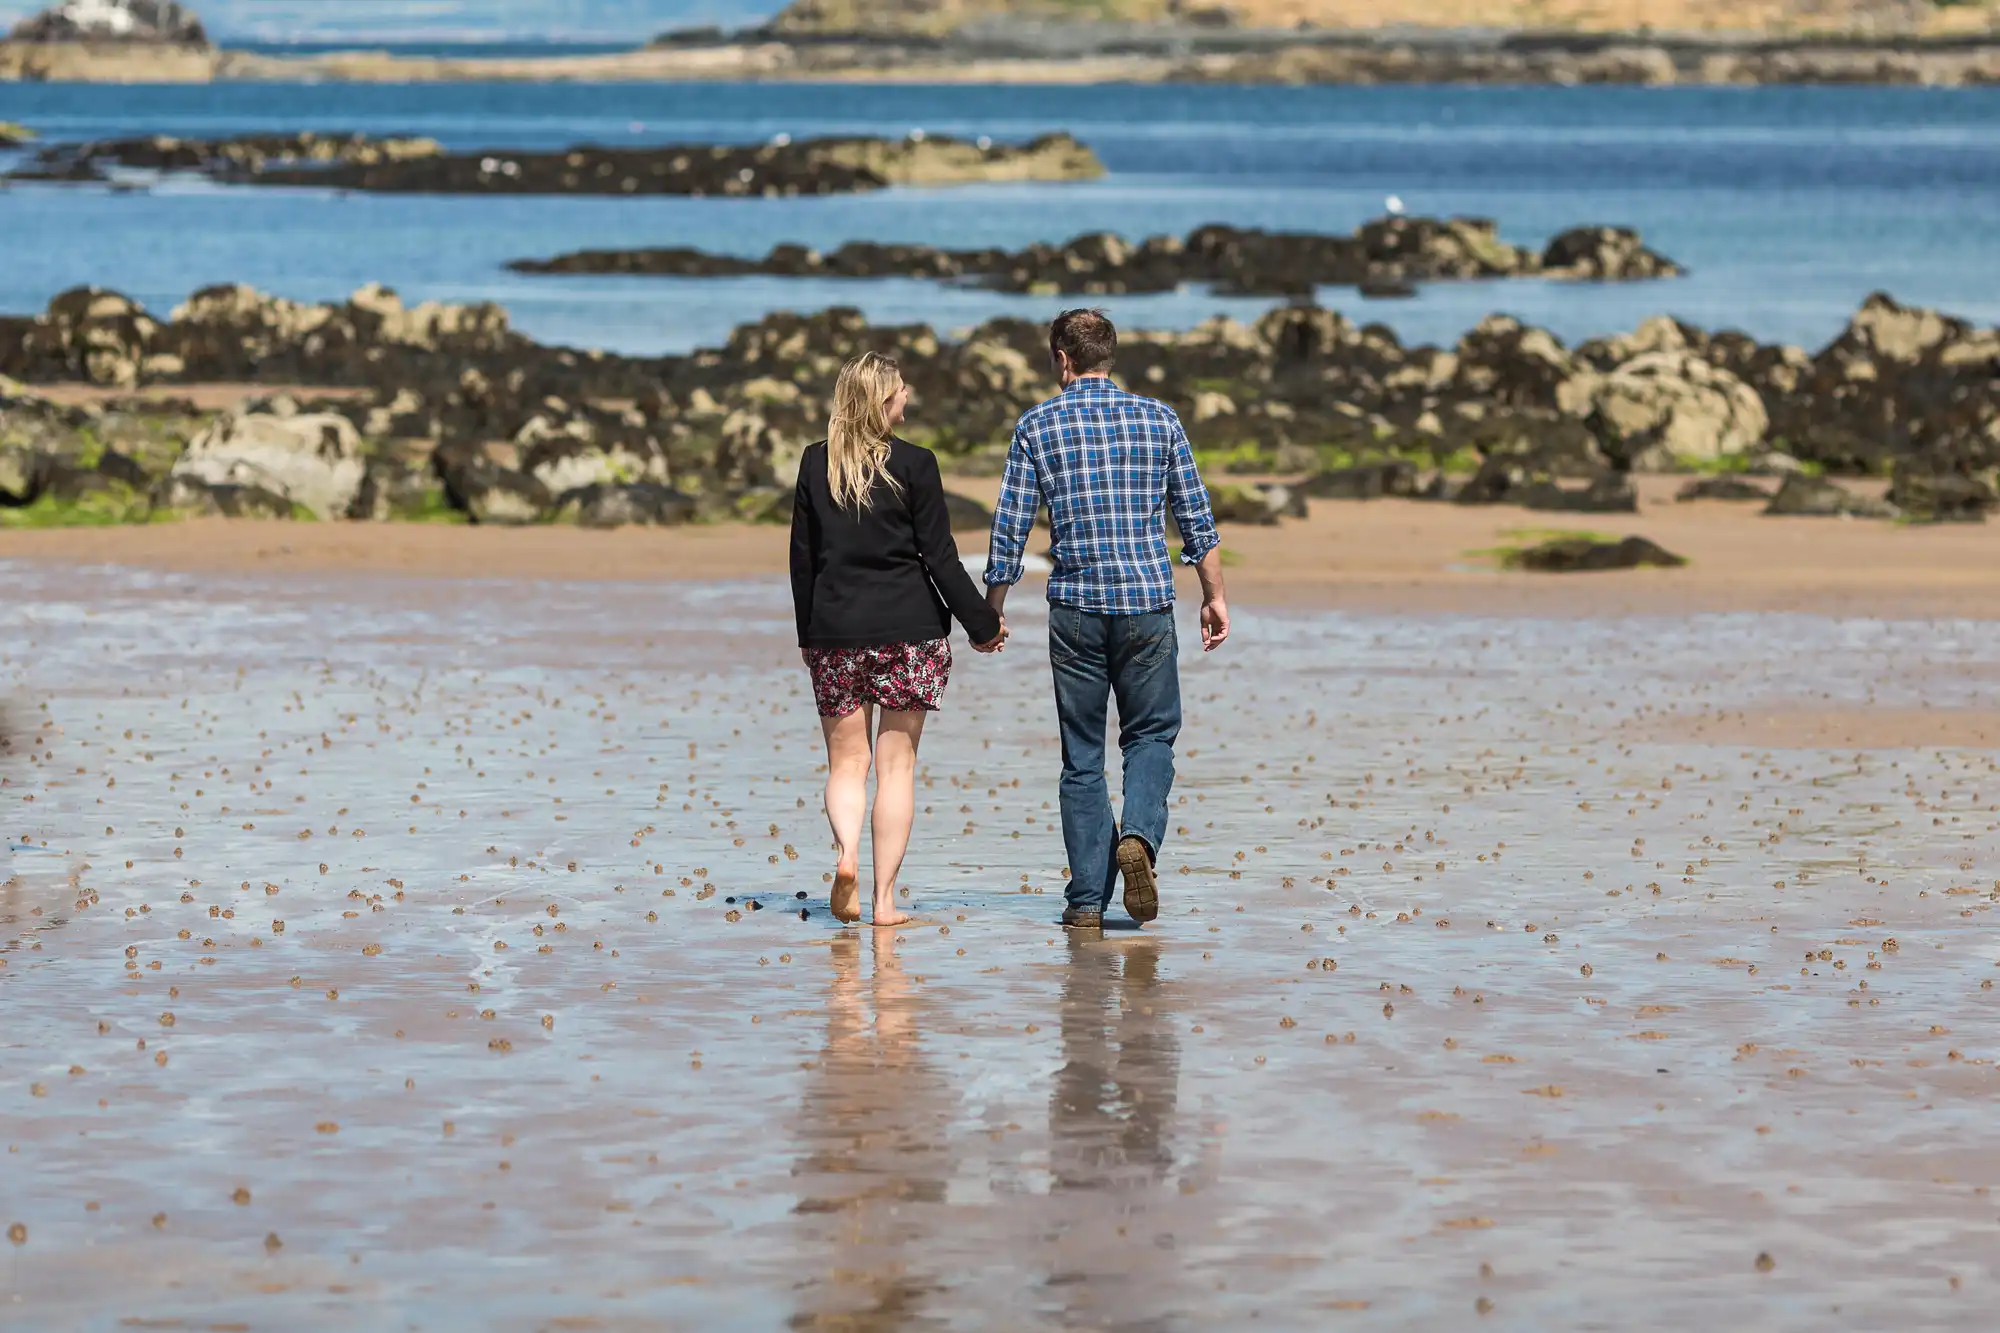 A couple walks hand in hand on a wet sandy beach, with rocks and the ocean in the background.